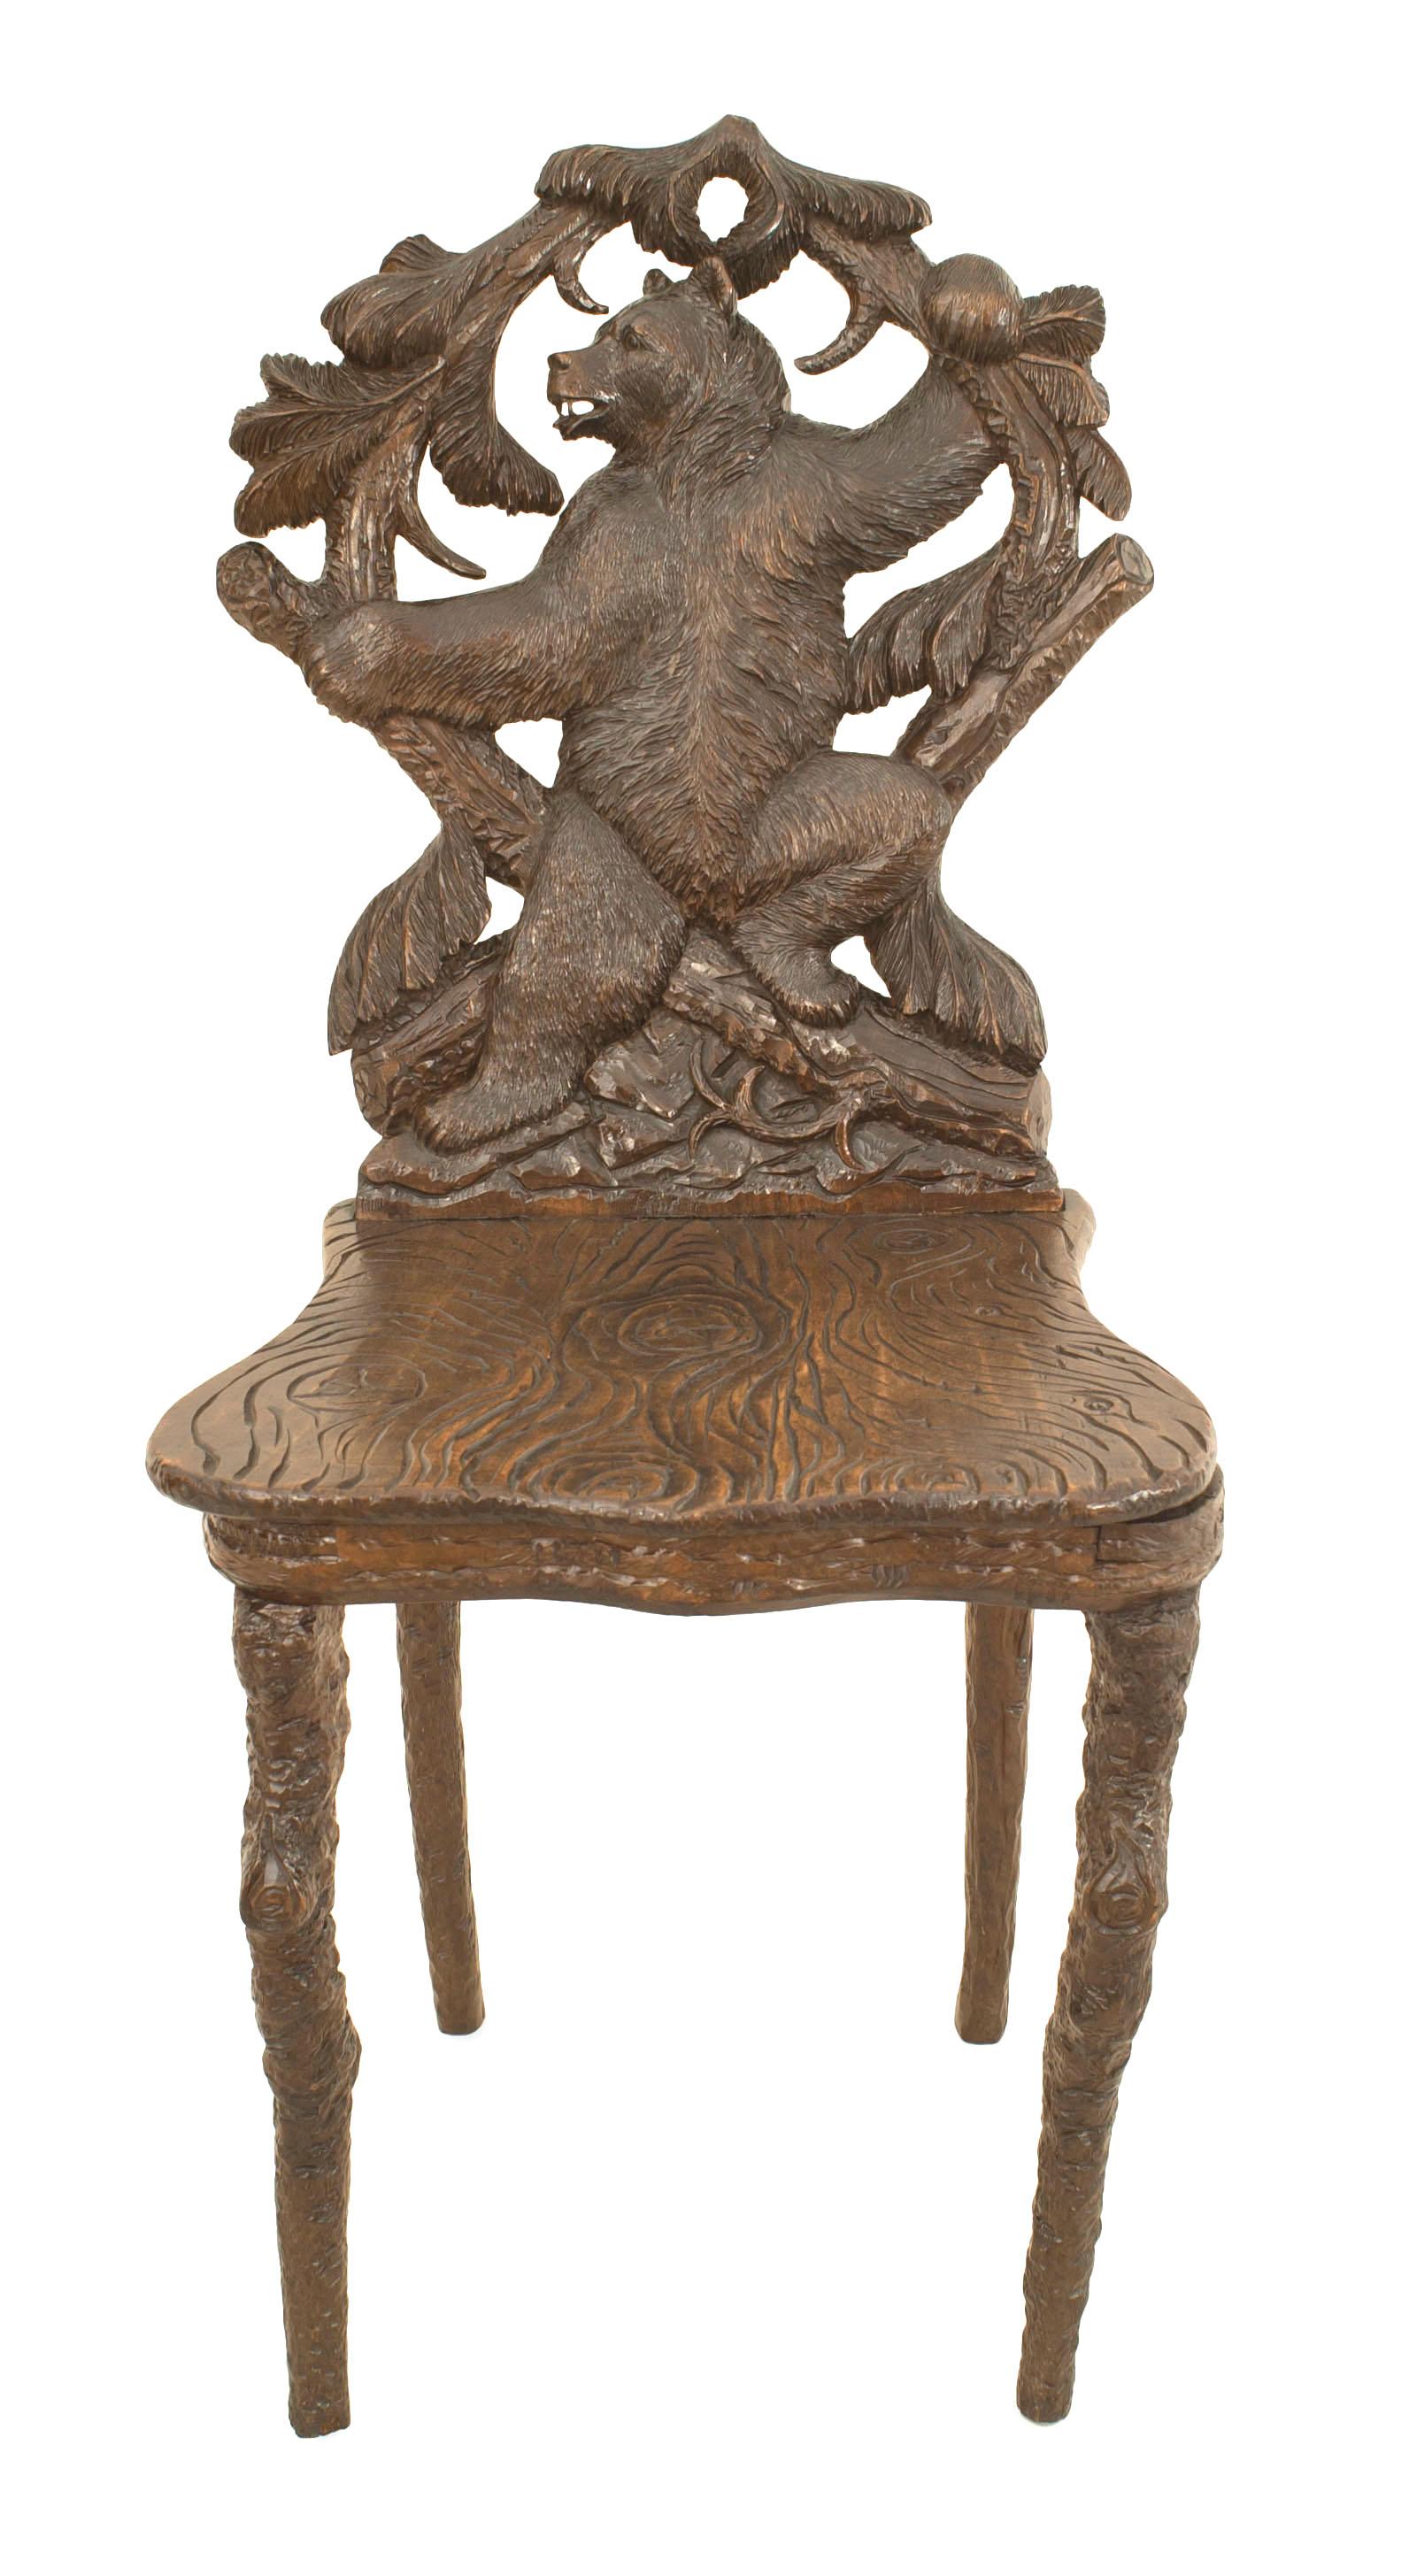 Pair of Rustic Black Forest (19th Cent) walnut side chairs with floral carving and bear figure on back with faux wood carved seat and legs (1 having music box seat)
